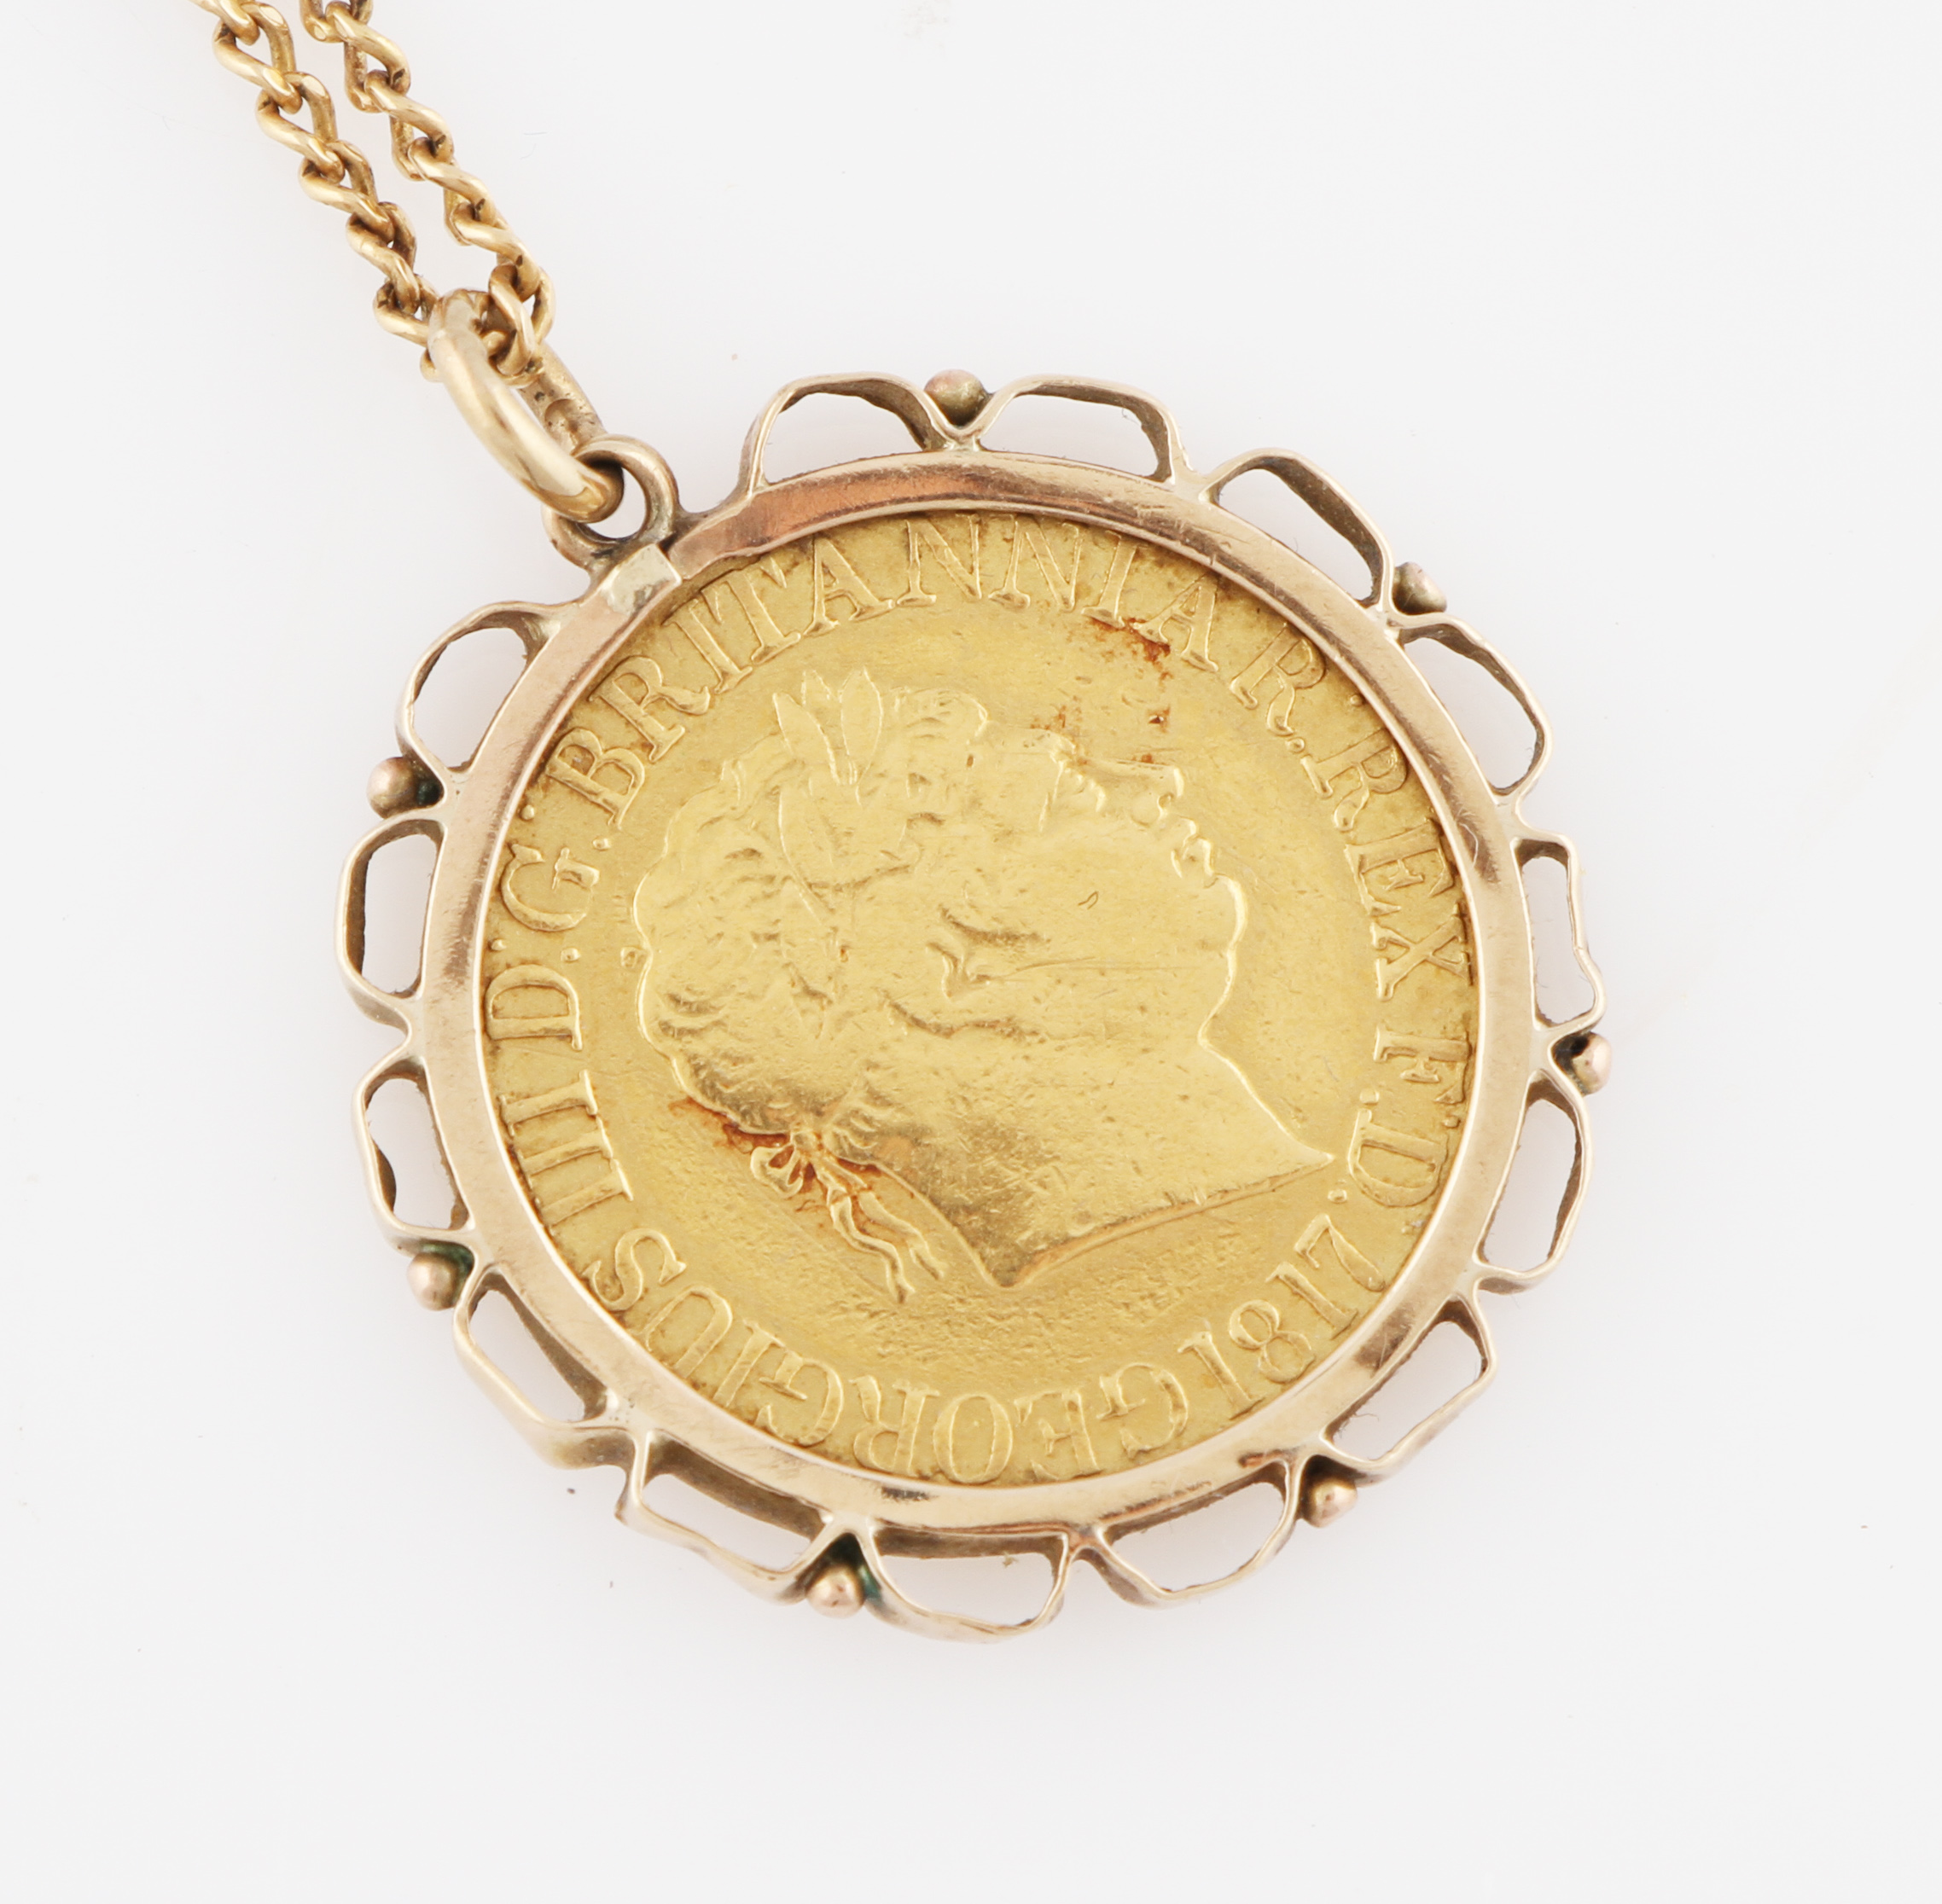 A George III 1817 full sovereign, in pendant mount on yellow metal curb link chain.